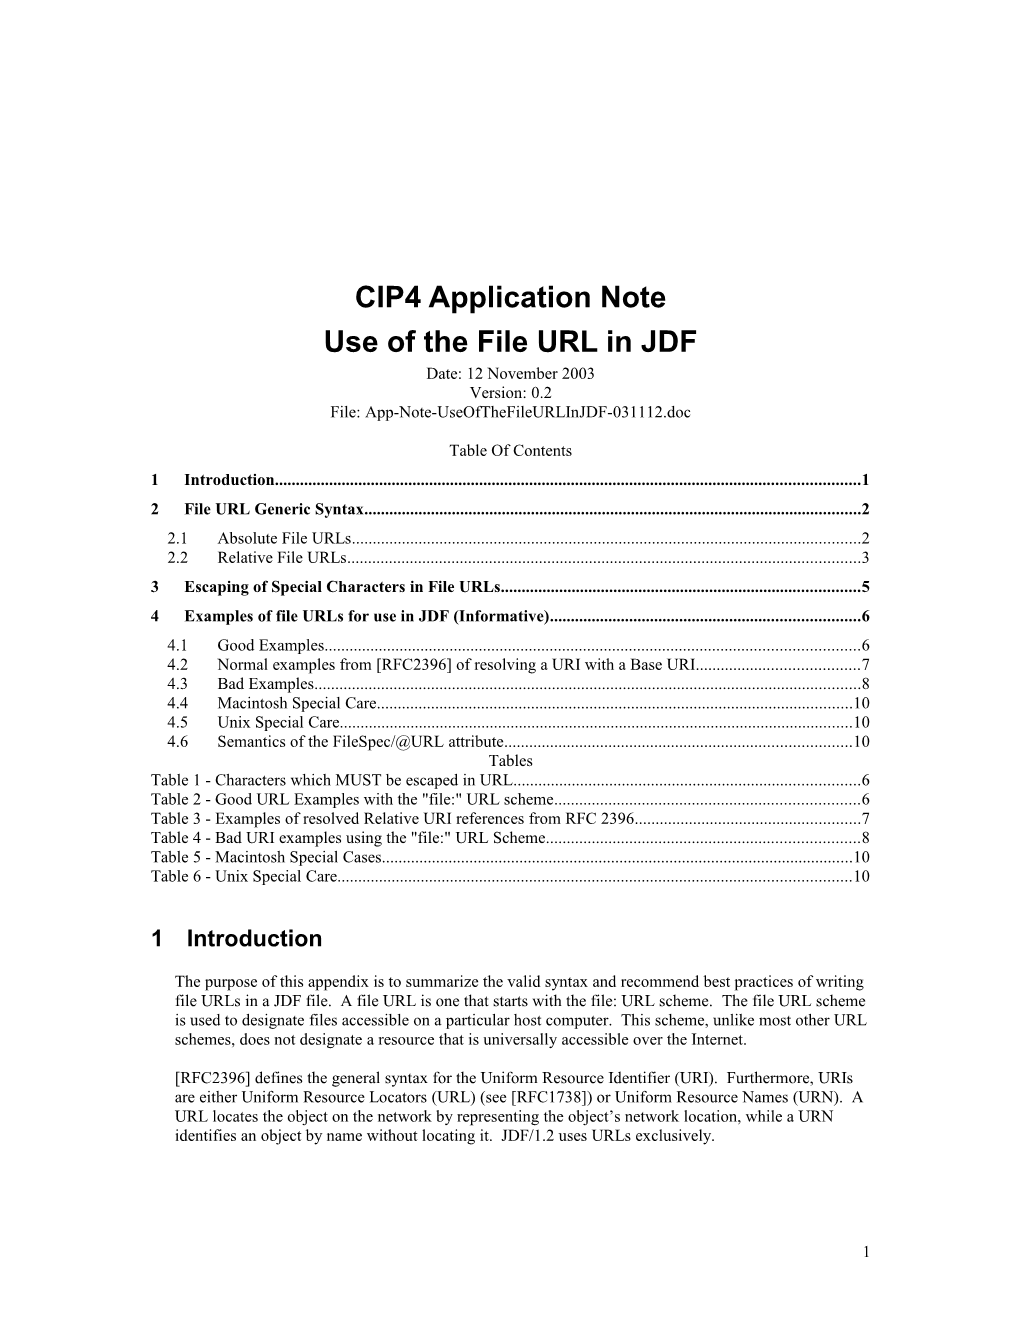 Use of the File URL in JDF (Normative)